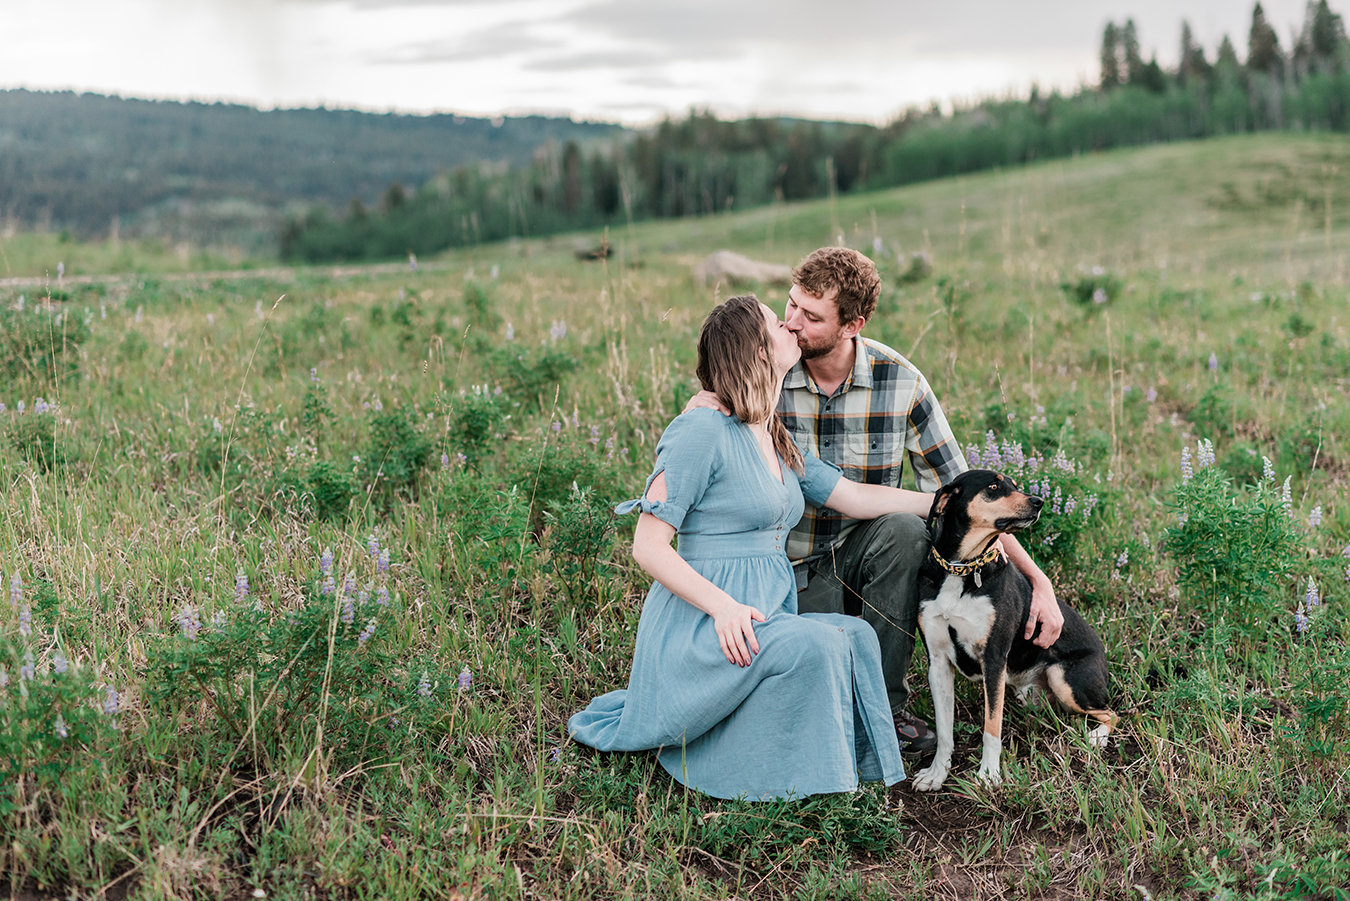 Annie & Taylor's dog looks away while the two kiss during their Glenwood Springs engagement photos